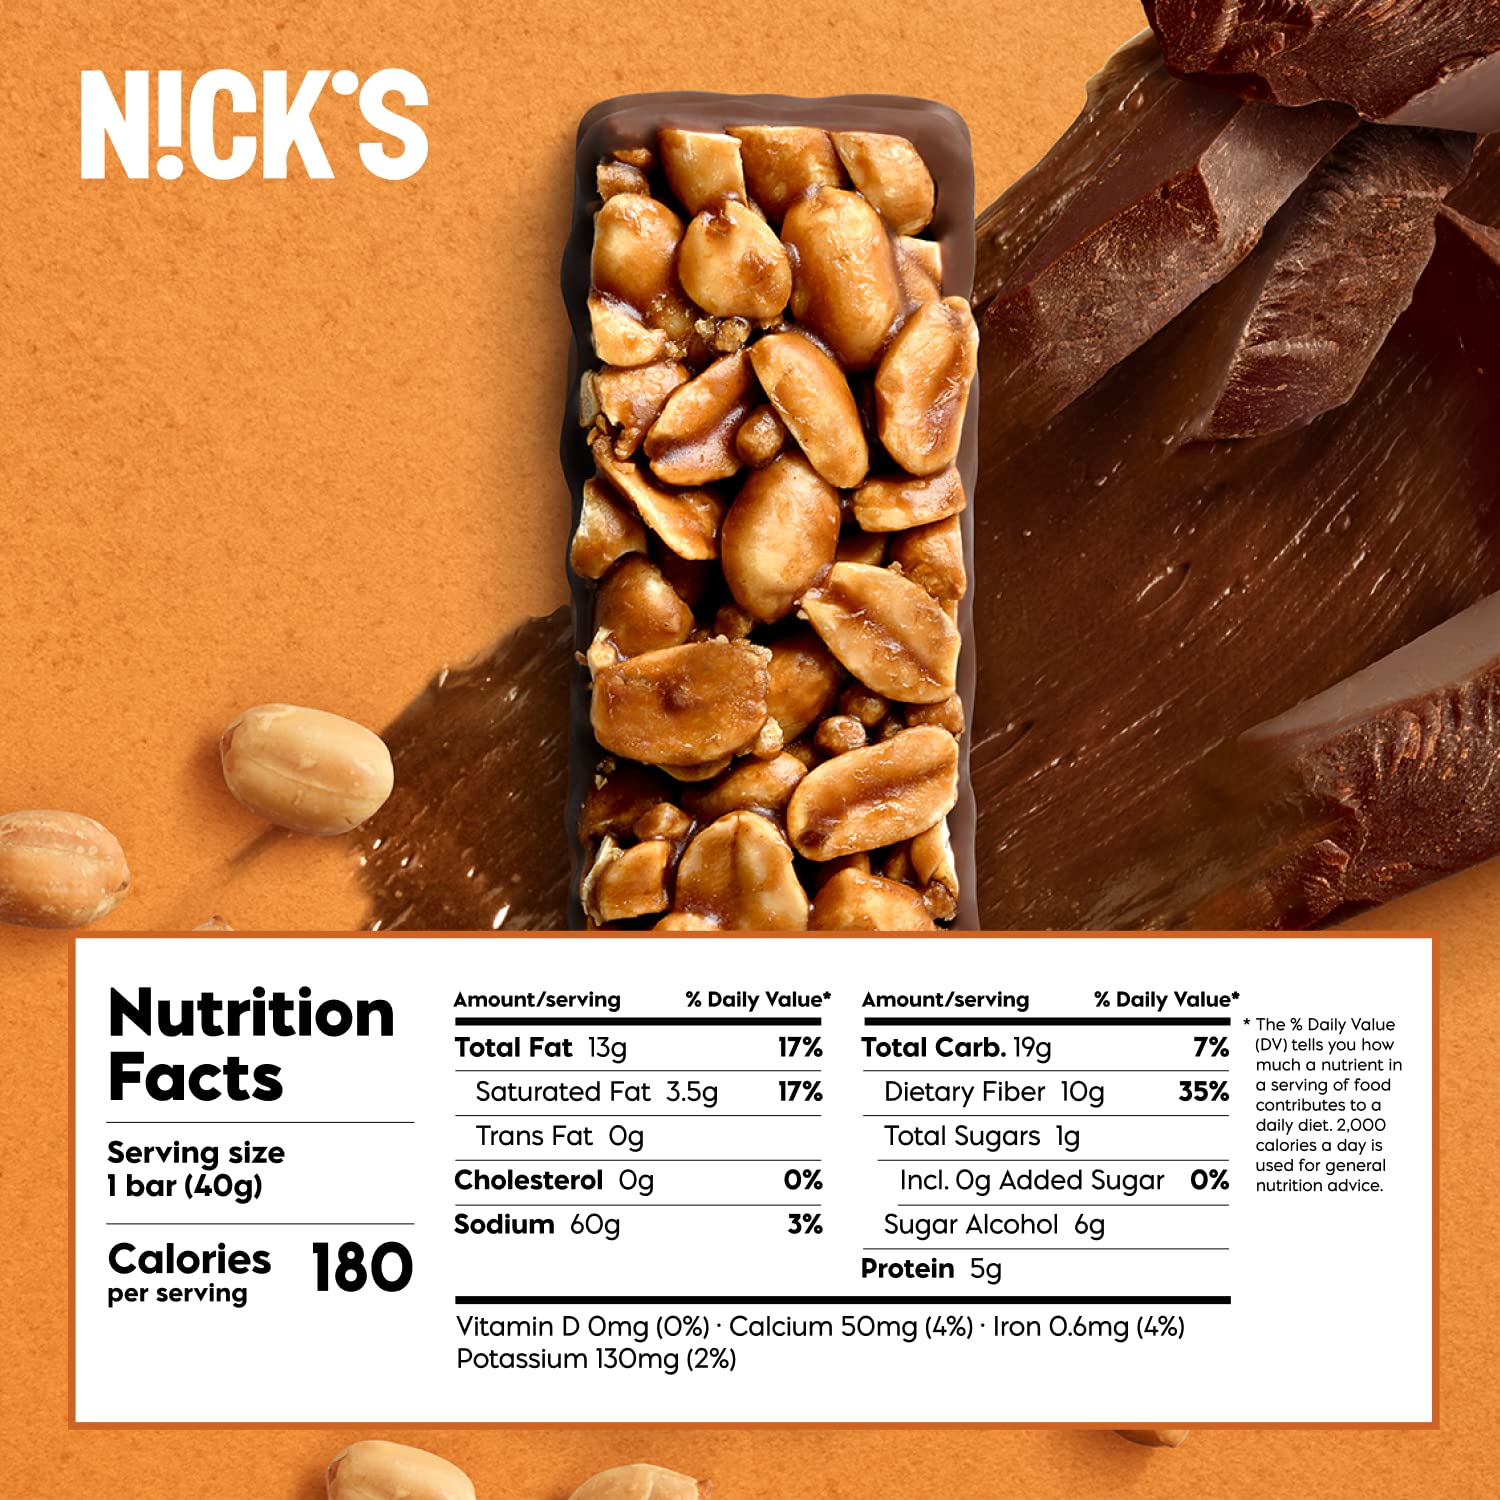 NICK'S Peanut Chocolate Snack Bar, Keto Nut Snack for Sports, Hiking & Outdoor Activities, 1G sugar, 3G net carbs, healthy snack, (pack of 12)